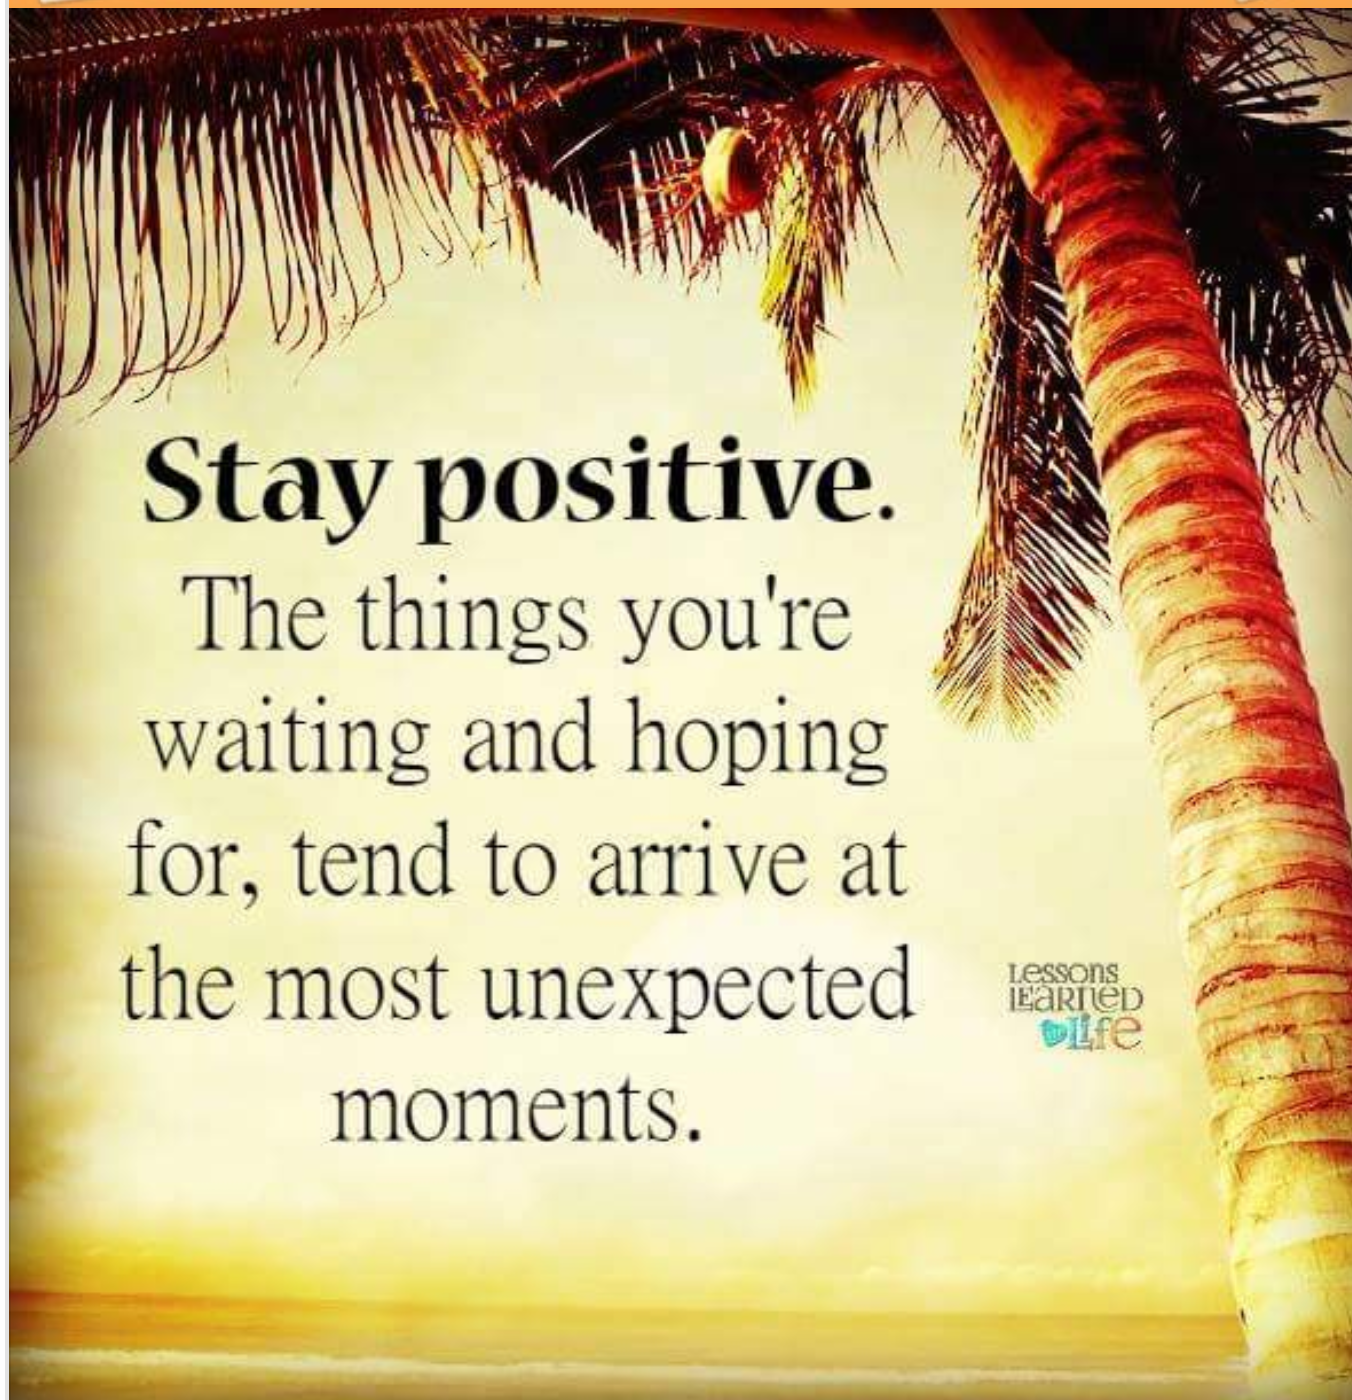 Staying my life. Stay positive.